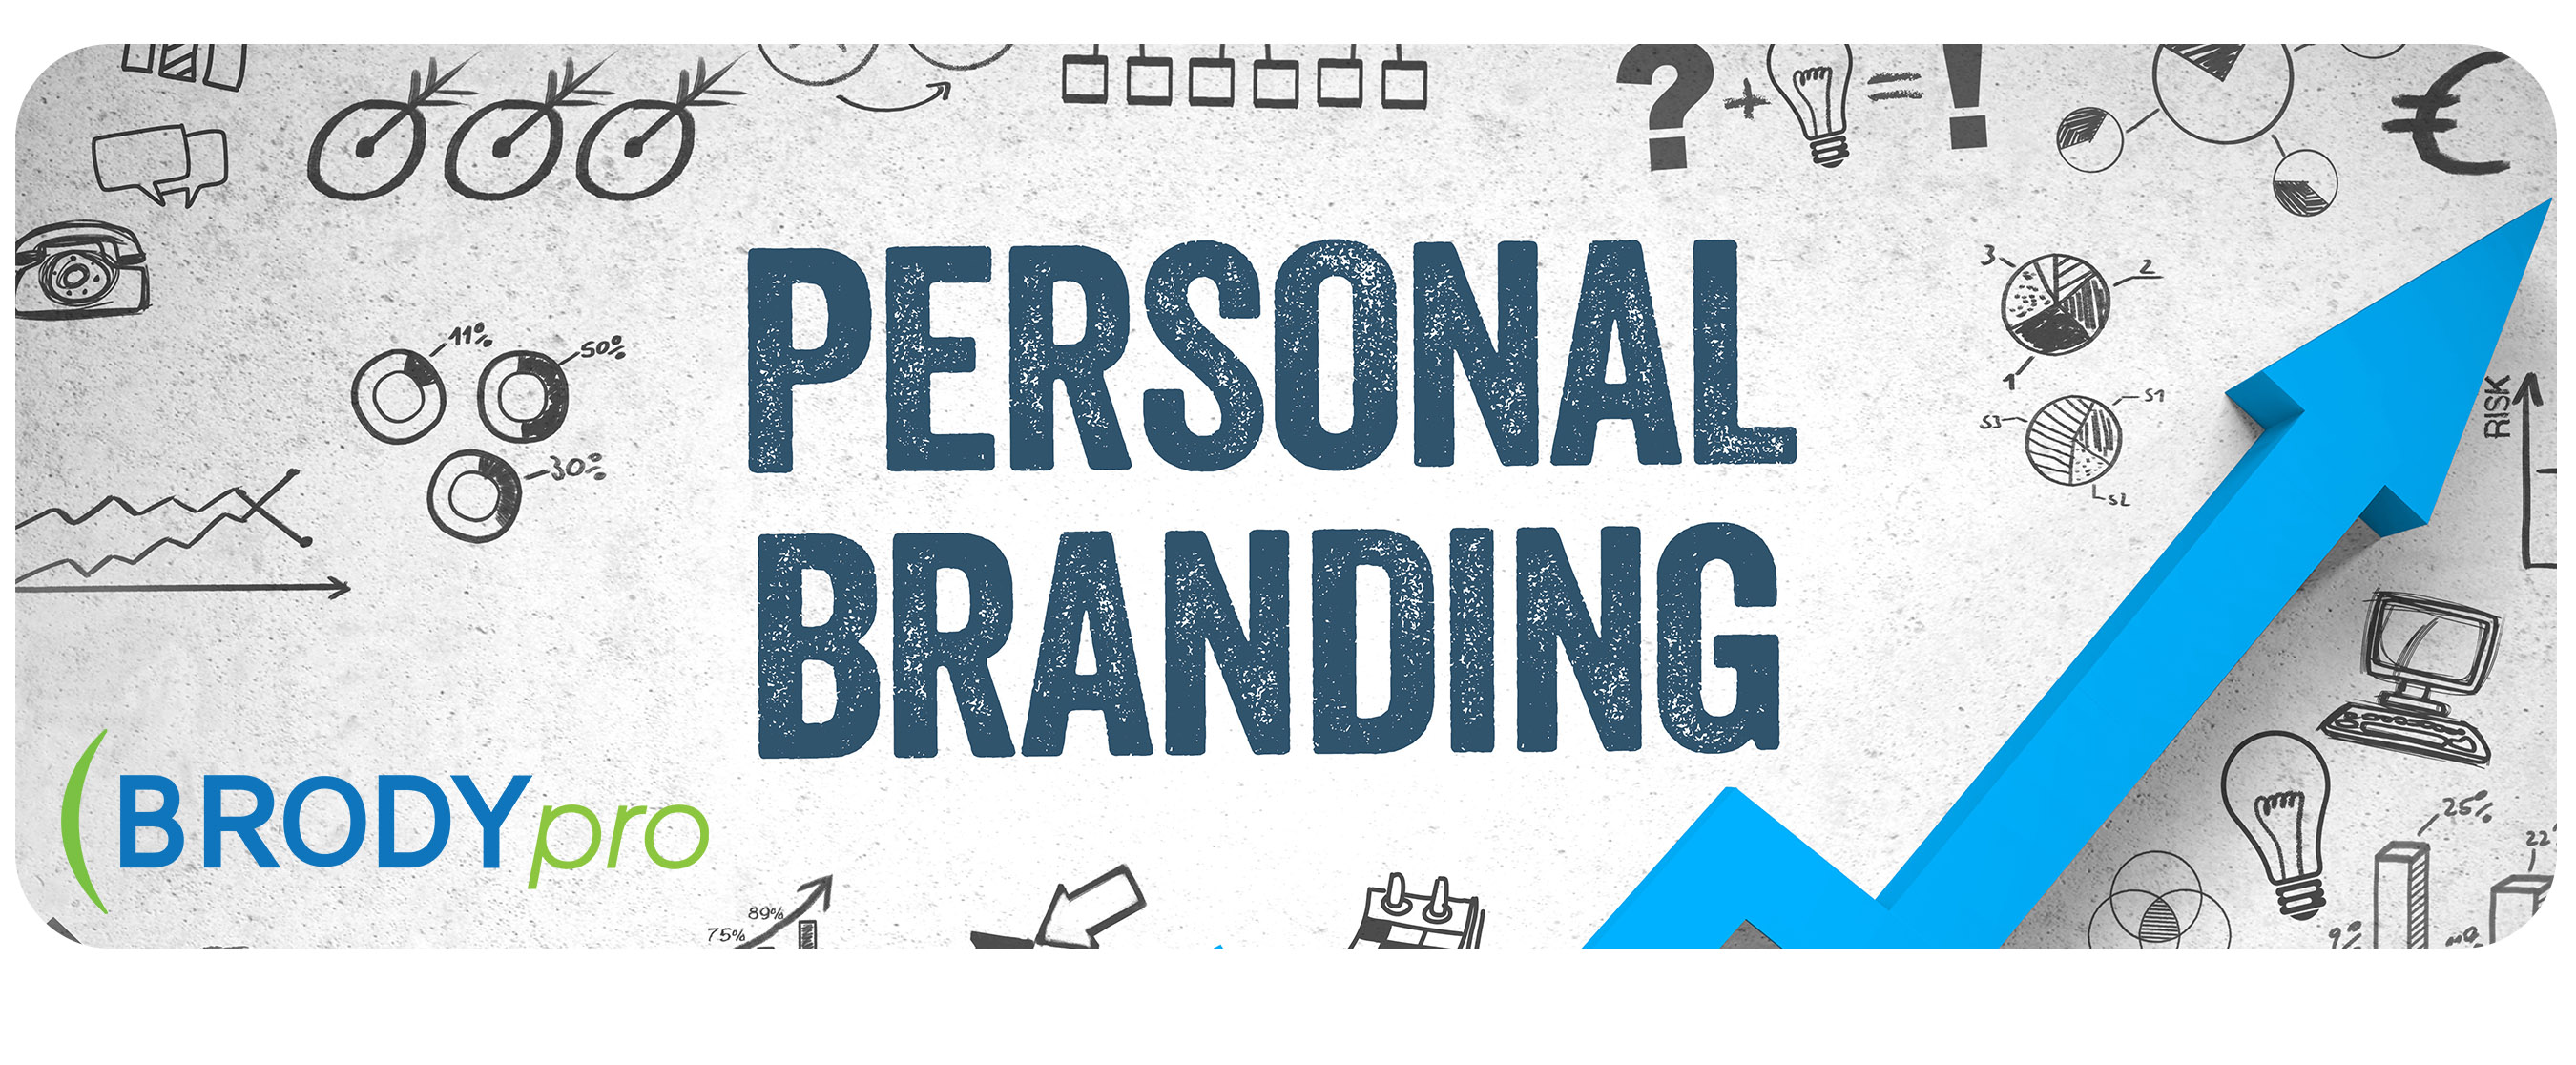 Own Your Career: Build Your Personal Brand